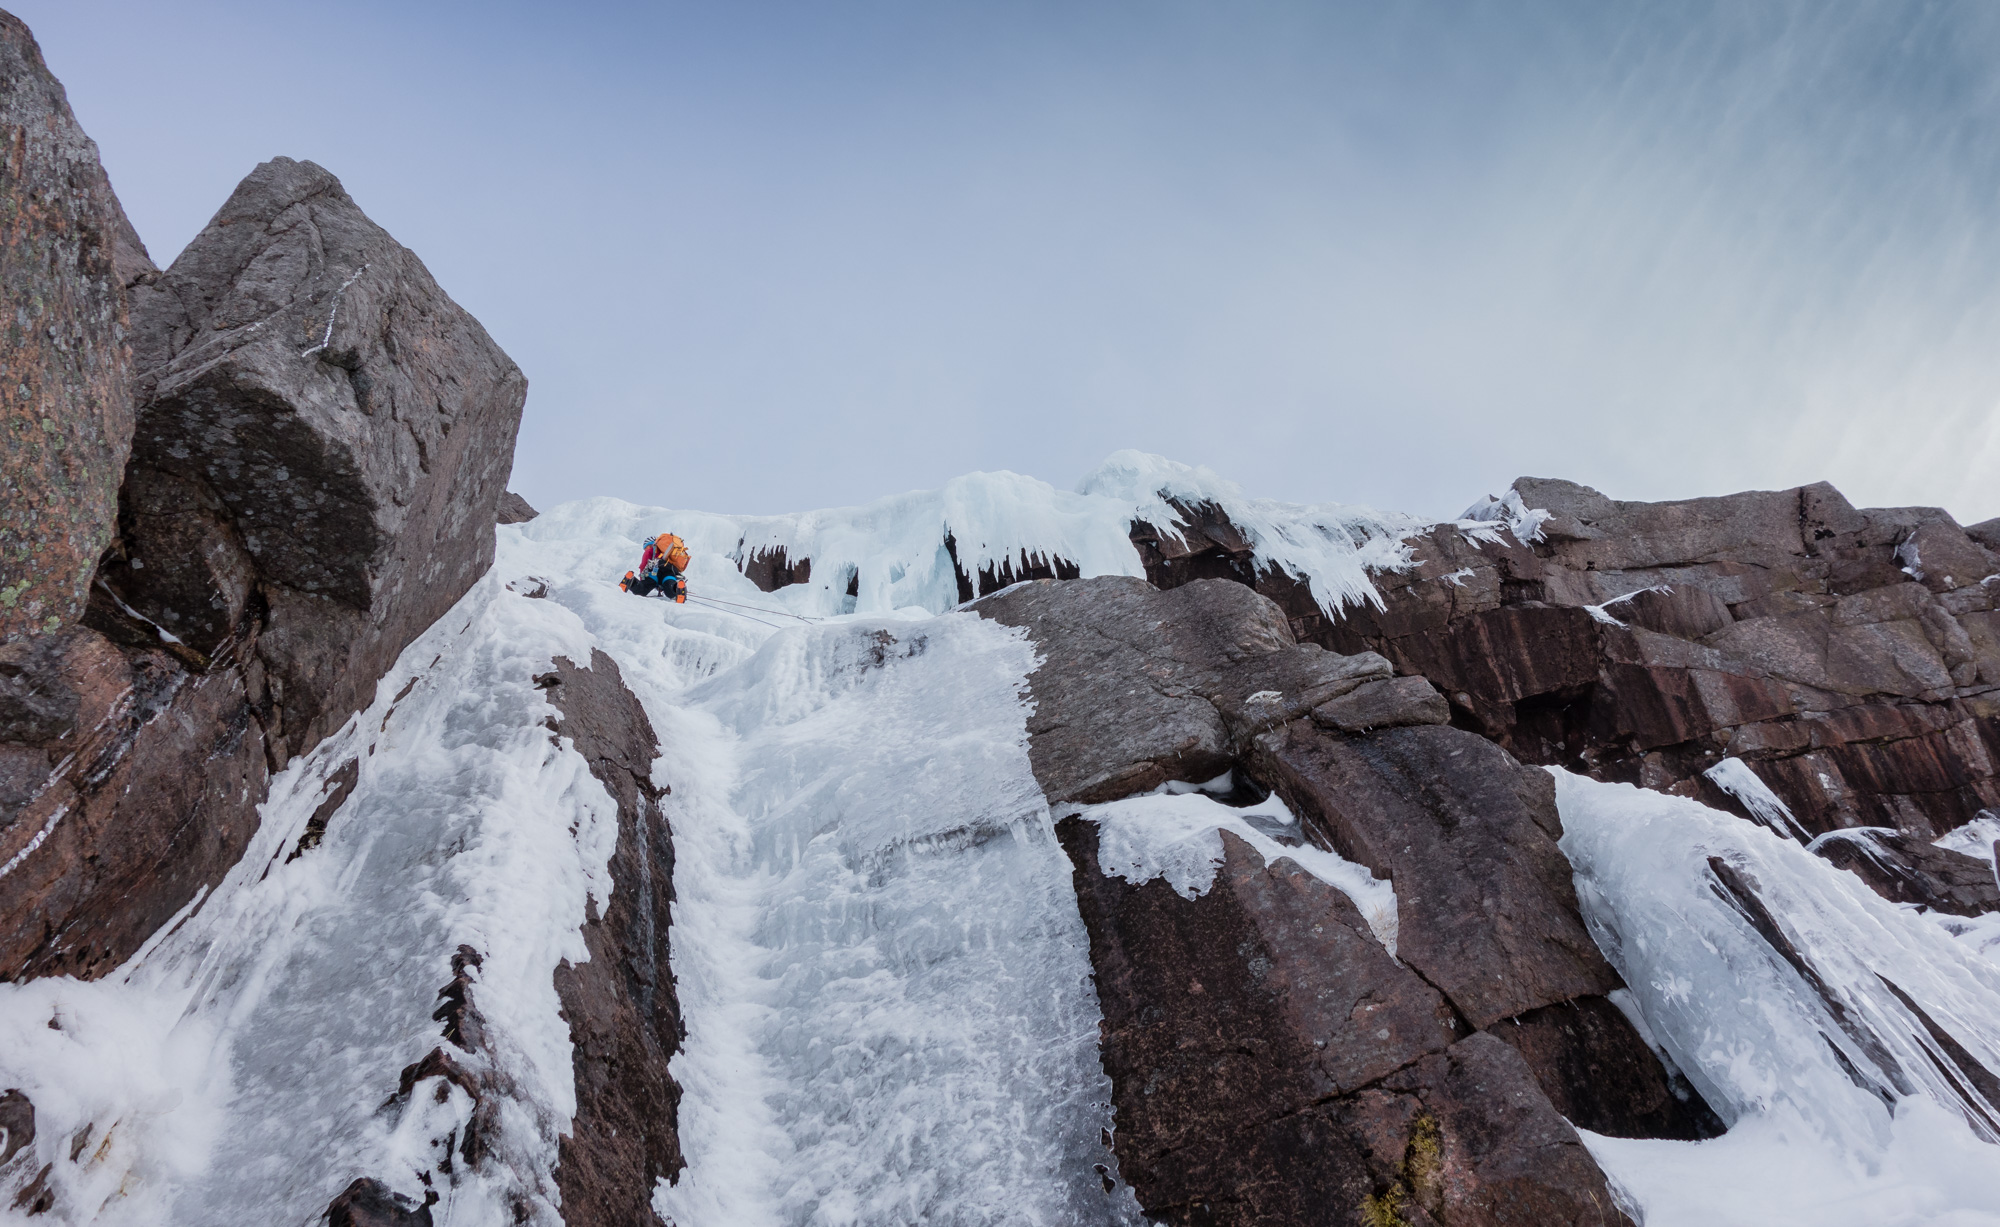 Andy approaching the final steepening after a rising traverse on slightly worrying ice. Photo credit: Joe Dobson